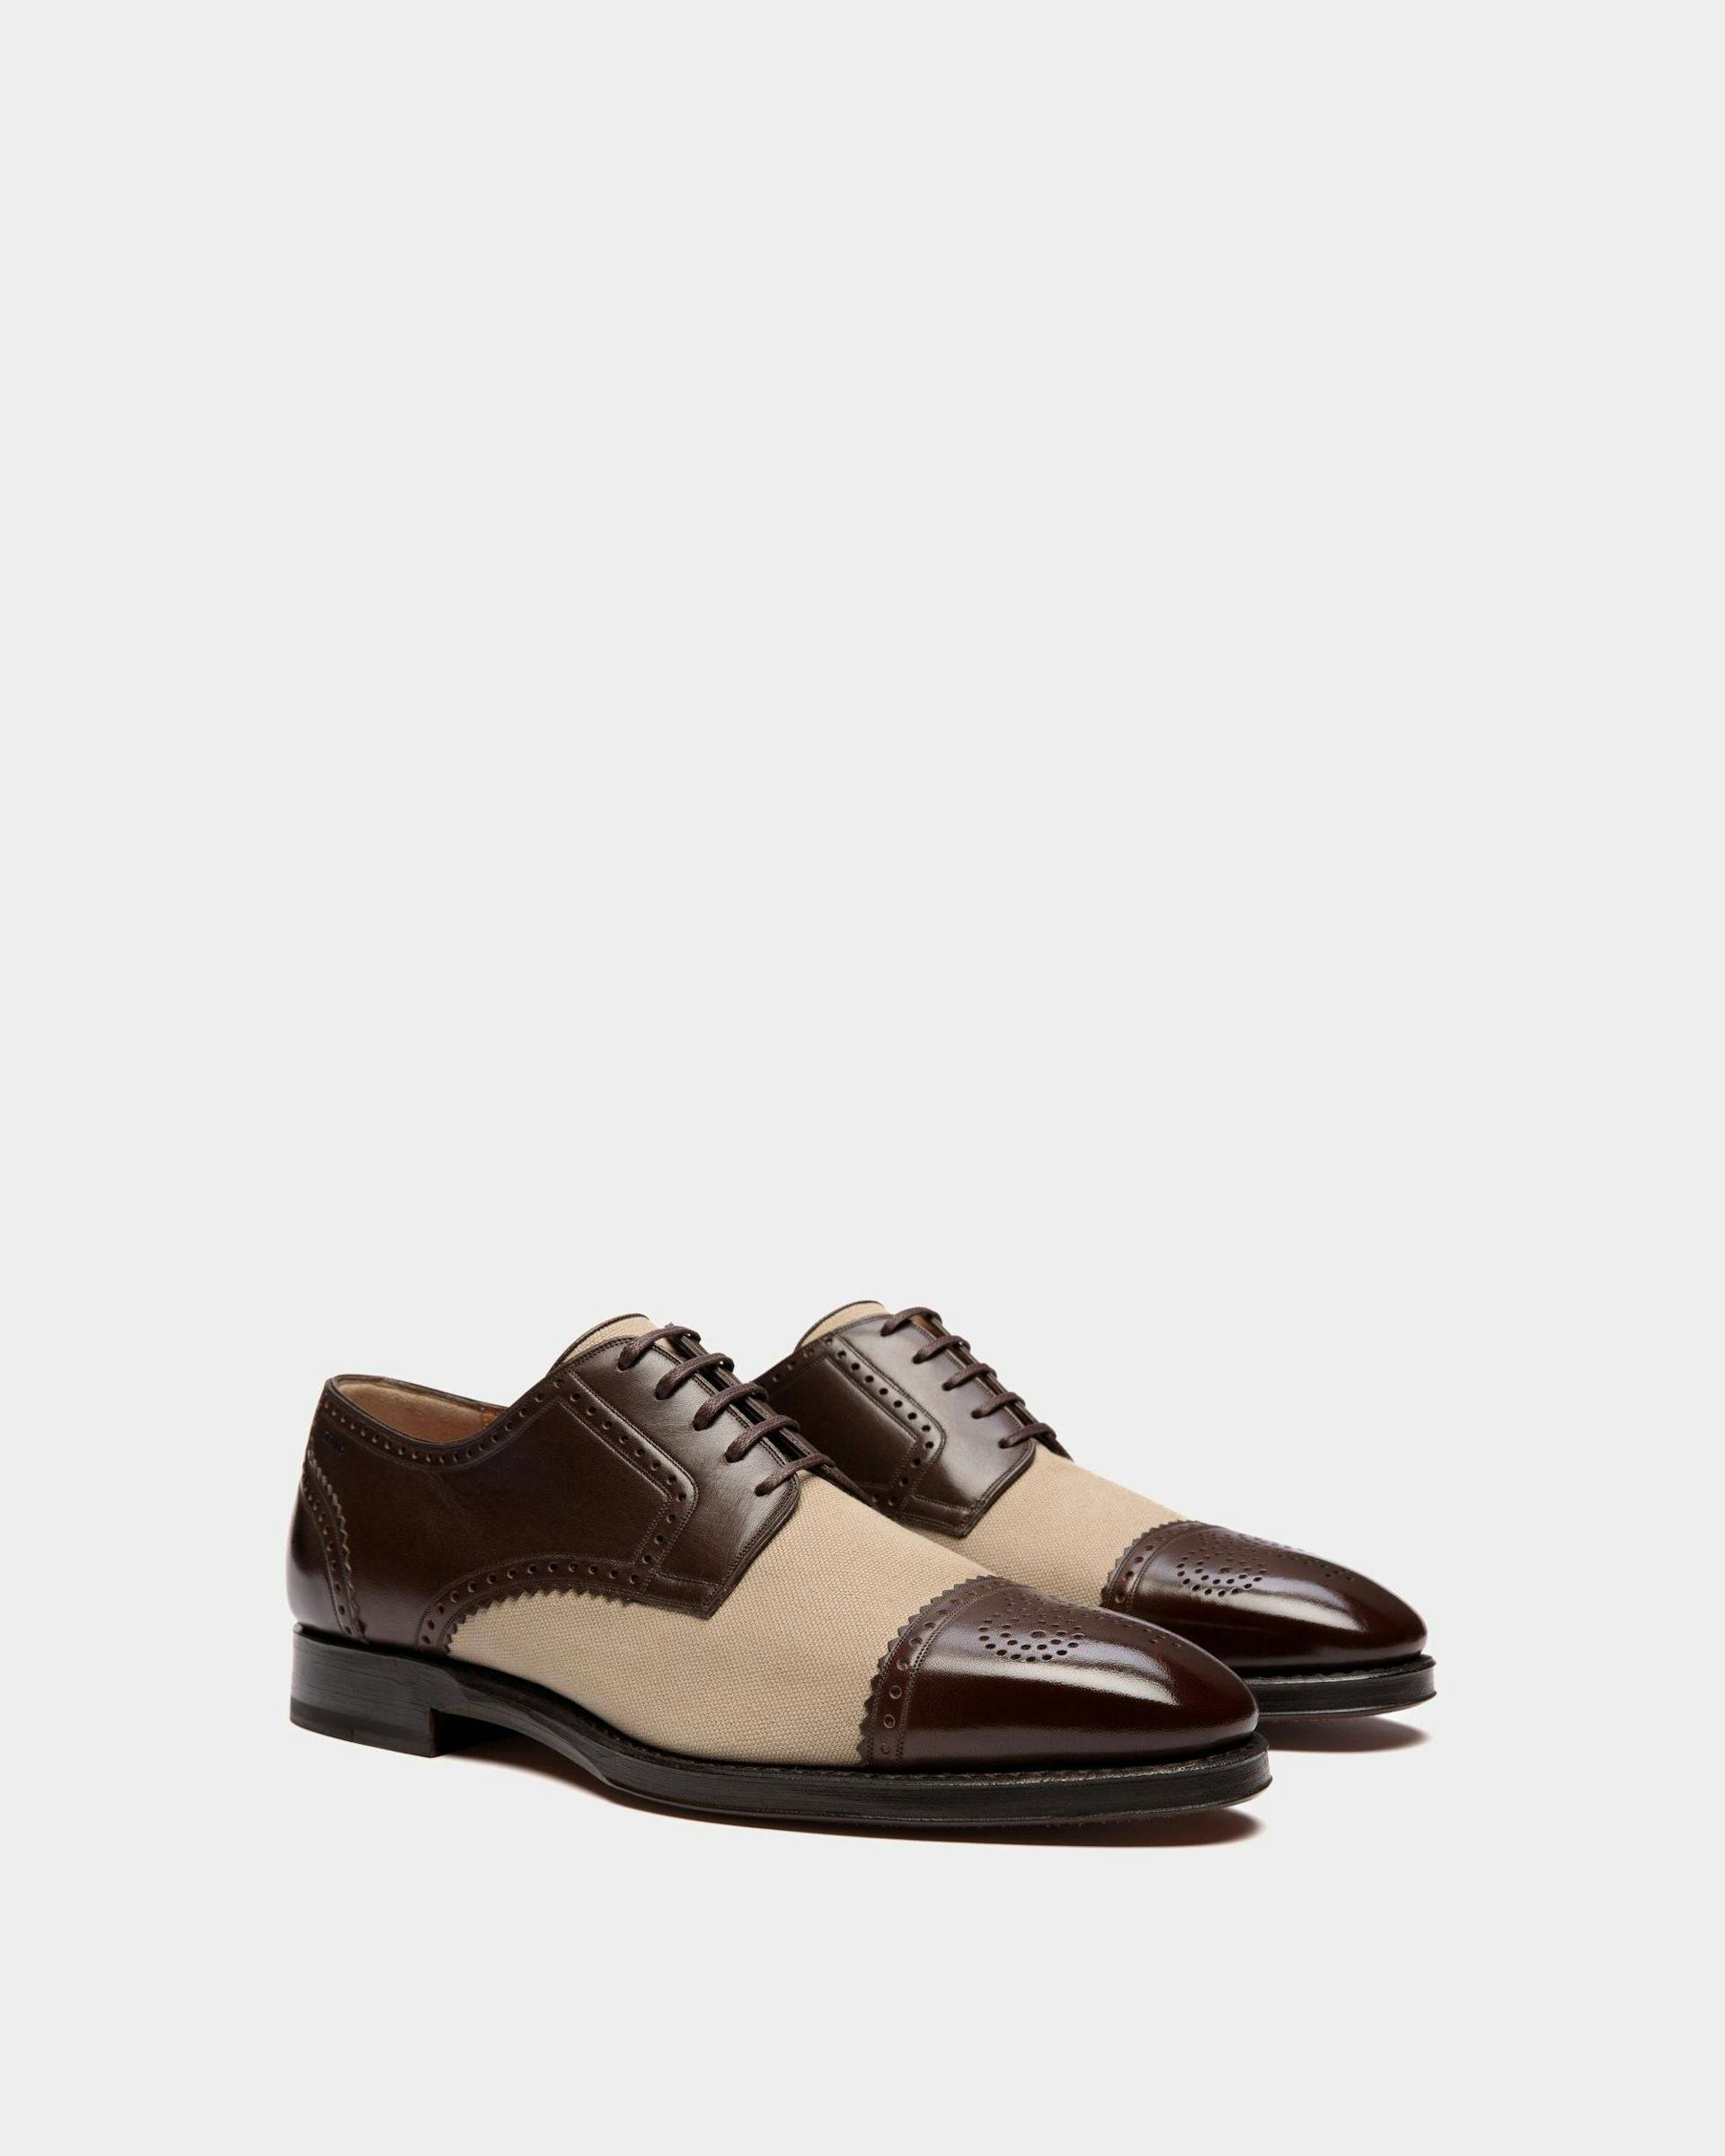 Men's Scribe Derby in Leather and Fabric | Bally | Still Life 3/4 Front